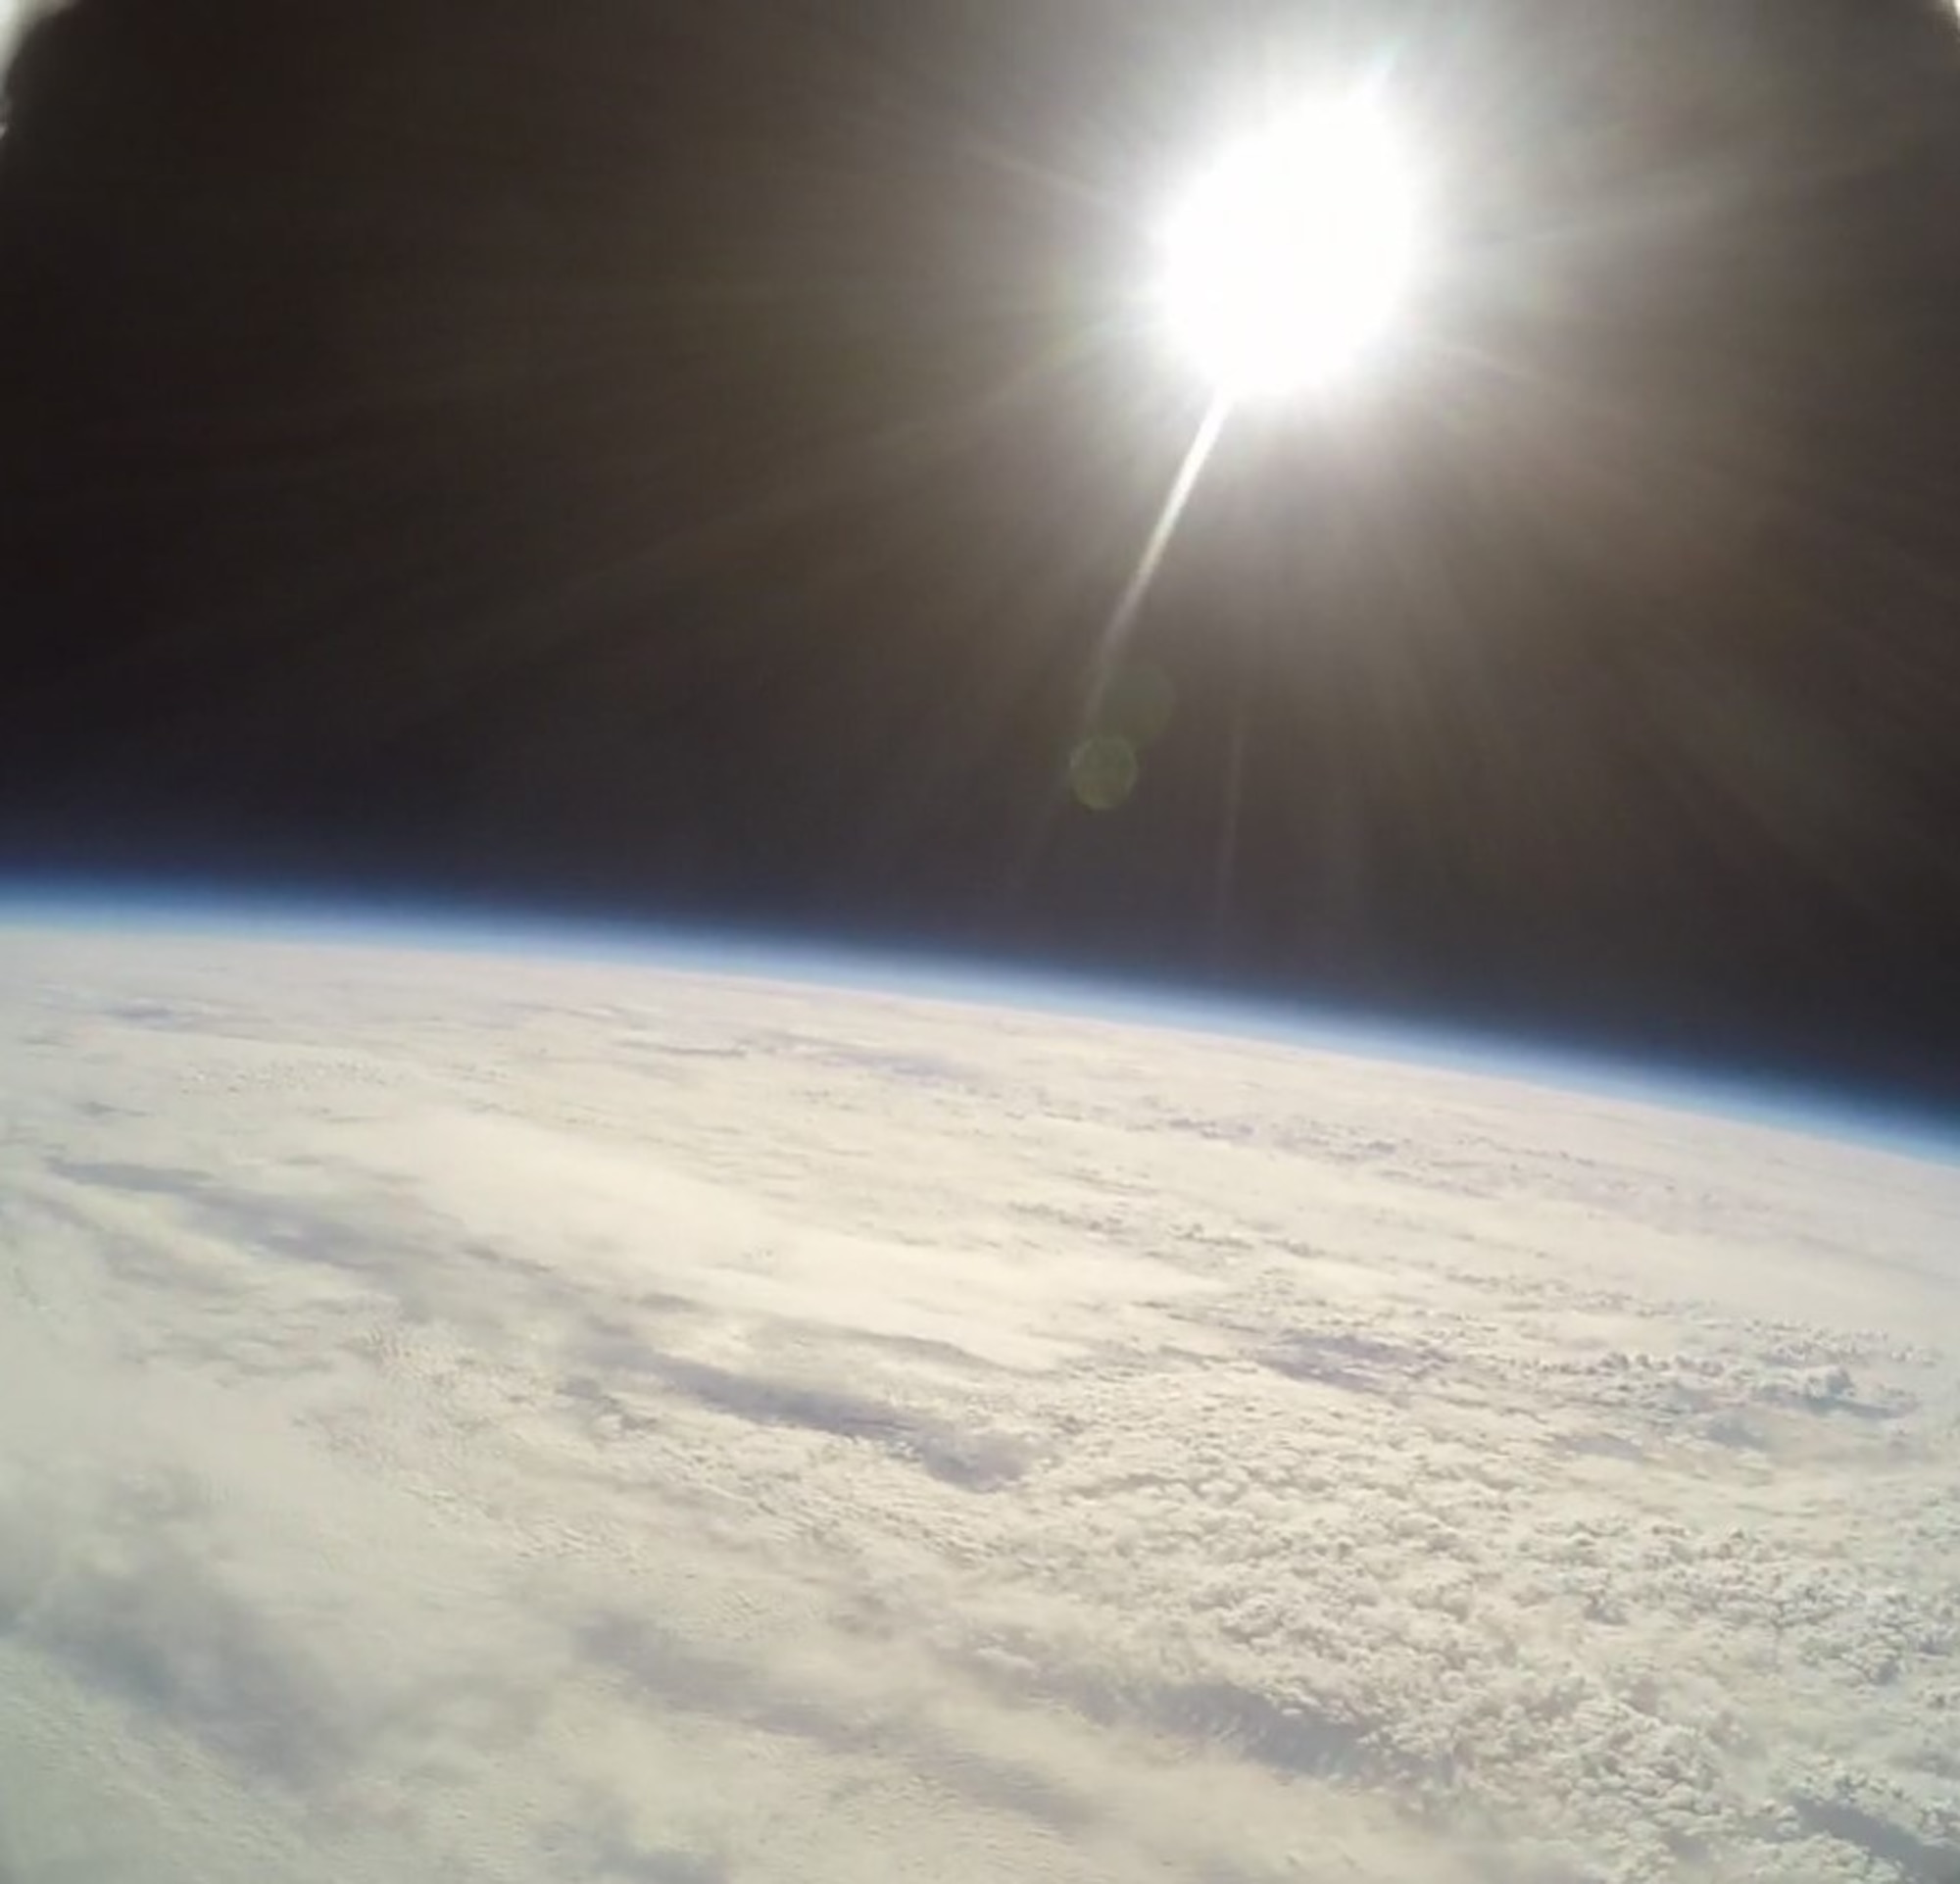 A GoPro attached to a high-altitude computer and floating over Illinois records the sun and horizon over earth, which was done as part of a final project for a group of eighth grade students from three schools, Nov. 30, 2018. The balloon reached a maximum altitude of 22.5 miles and recorded a temperature low of 67 degrees Fahrenheit. The balloon launch was made possible through an Air Force science, technology, engineering, and mathematics grant.